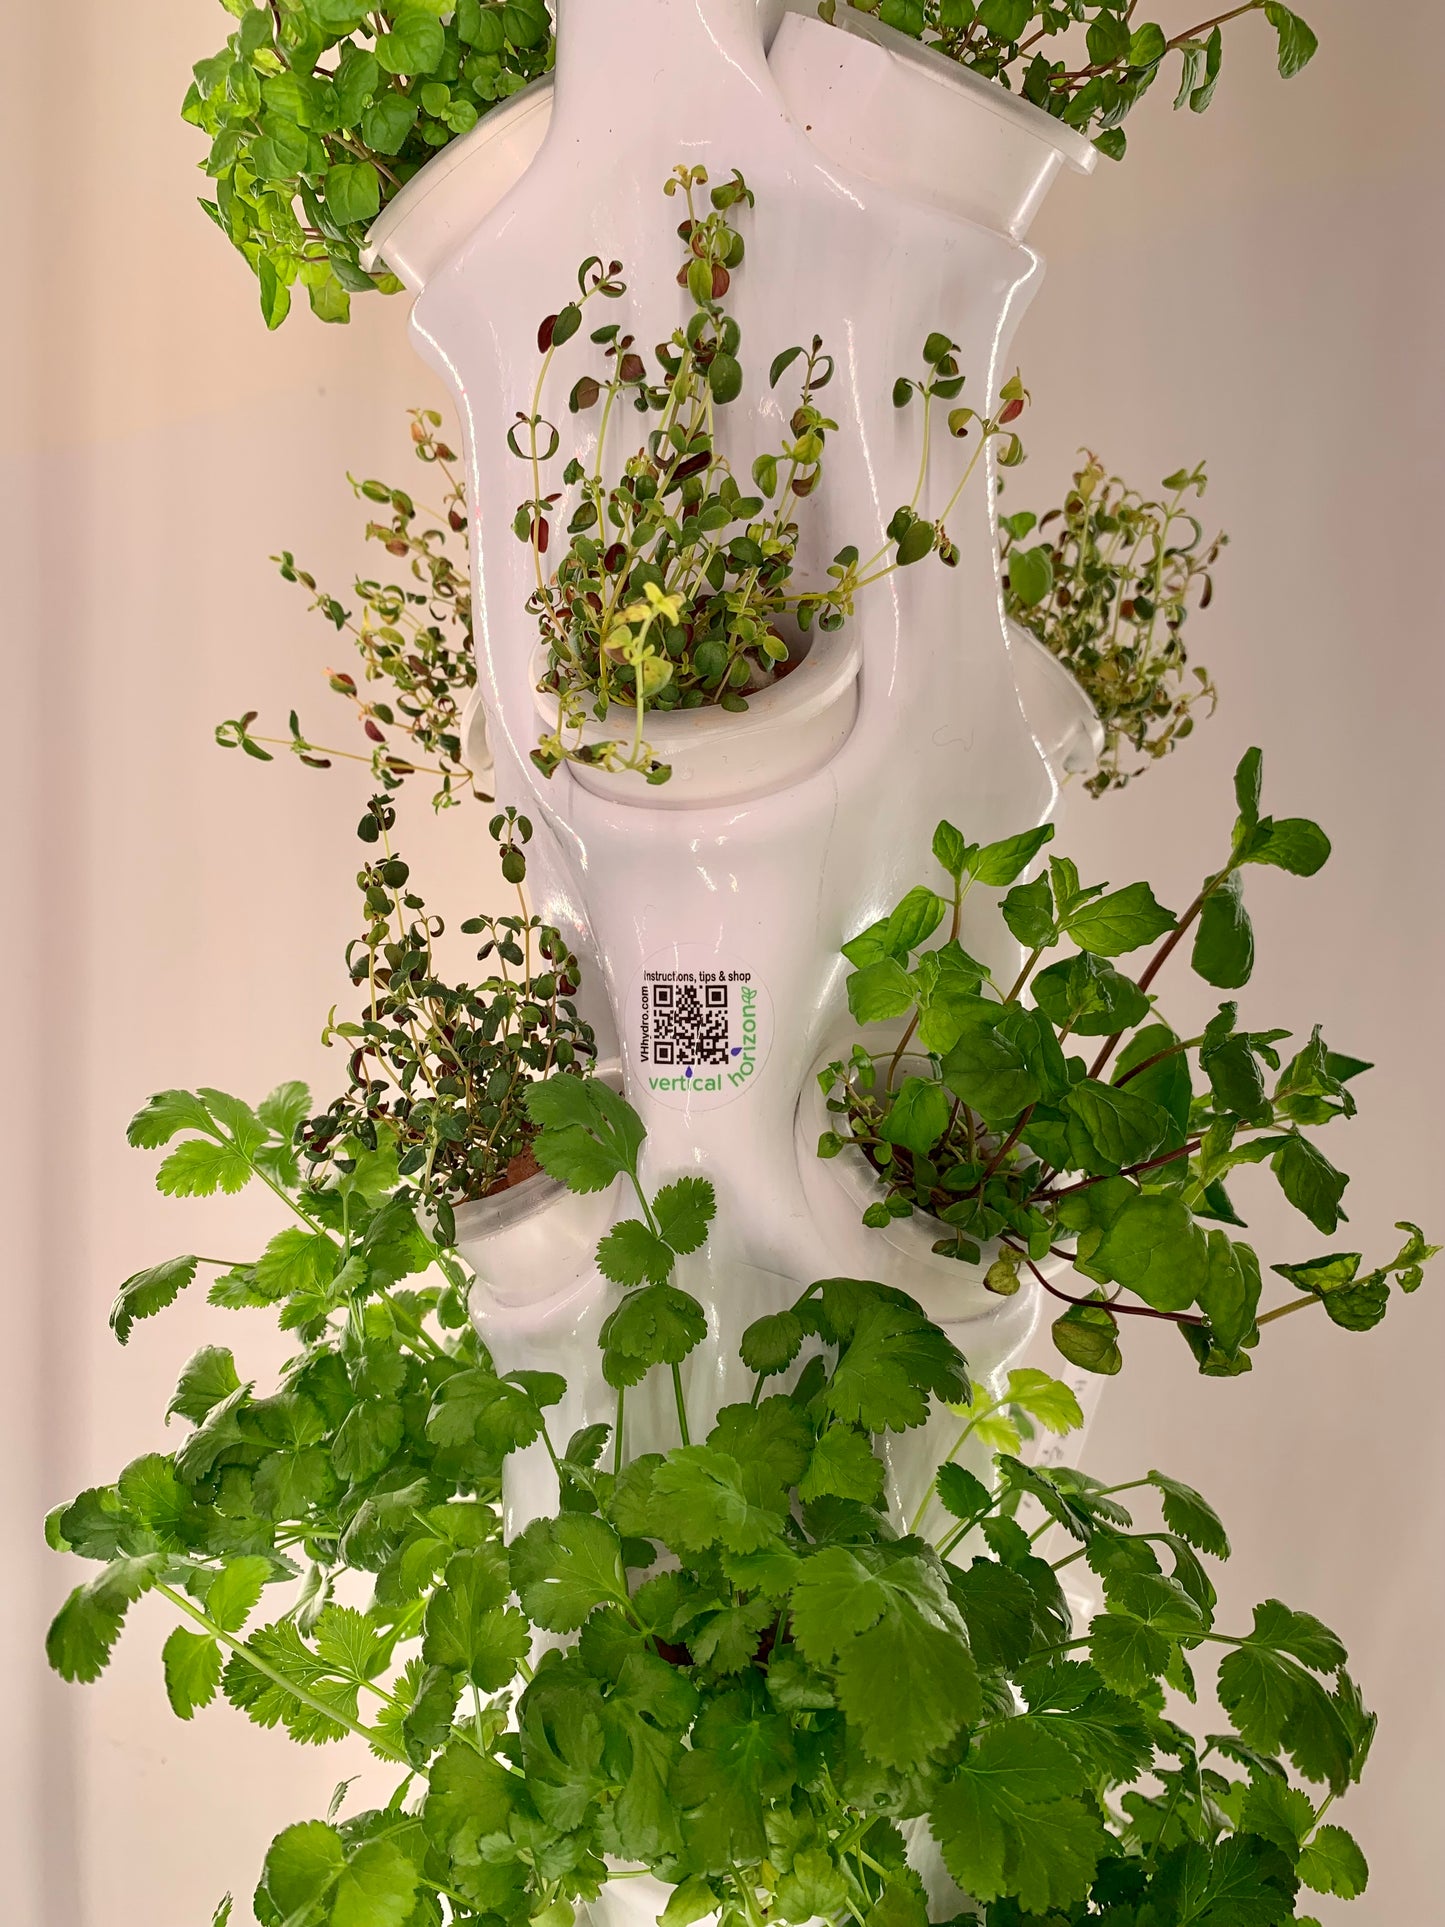 Vertical Hydroponic Tower Growing System 30 plant capacity